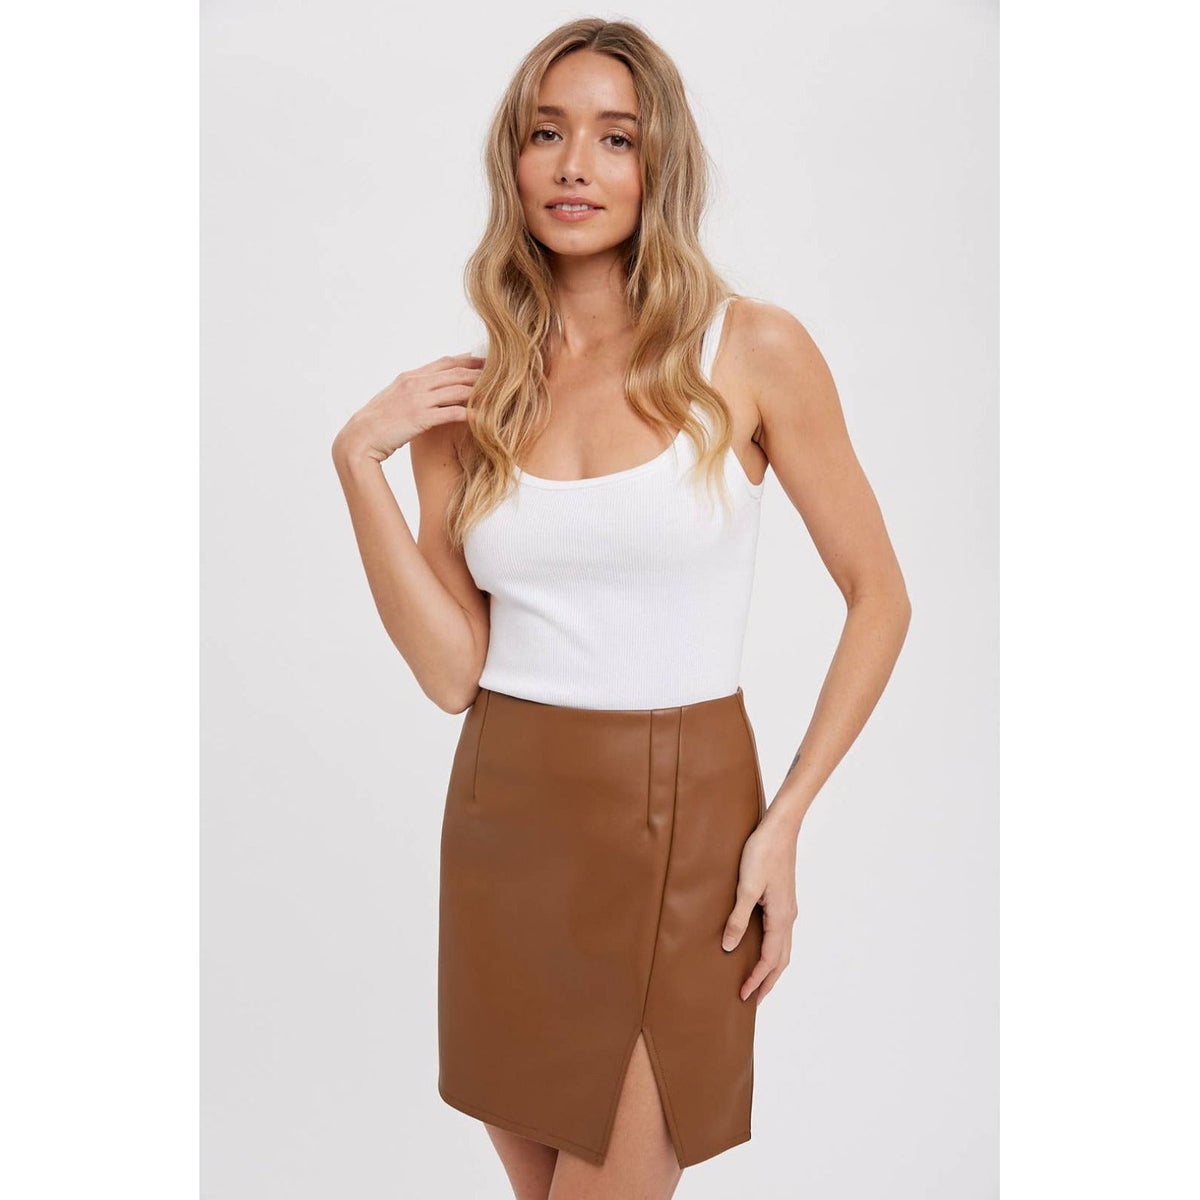 Light brown faux leather mini skirt with slit; womens clothing.